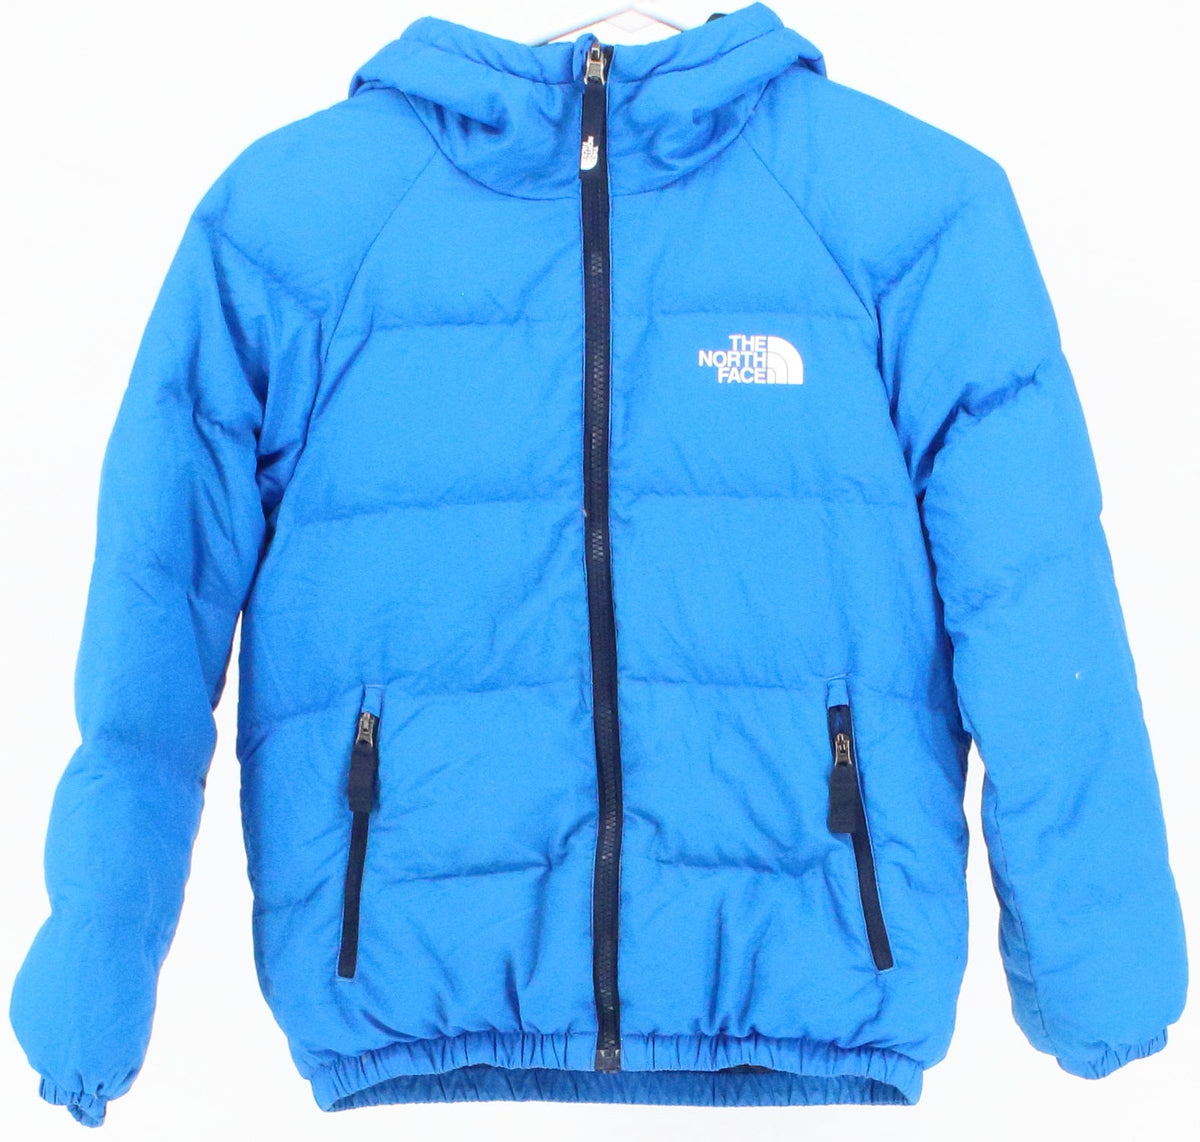 The North Face Blue Reversible Children's Puffer Jacket